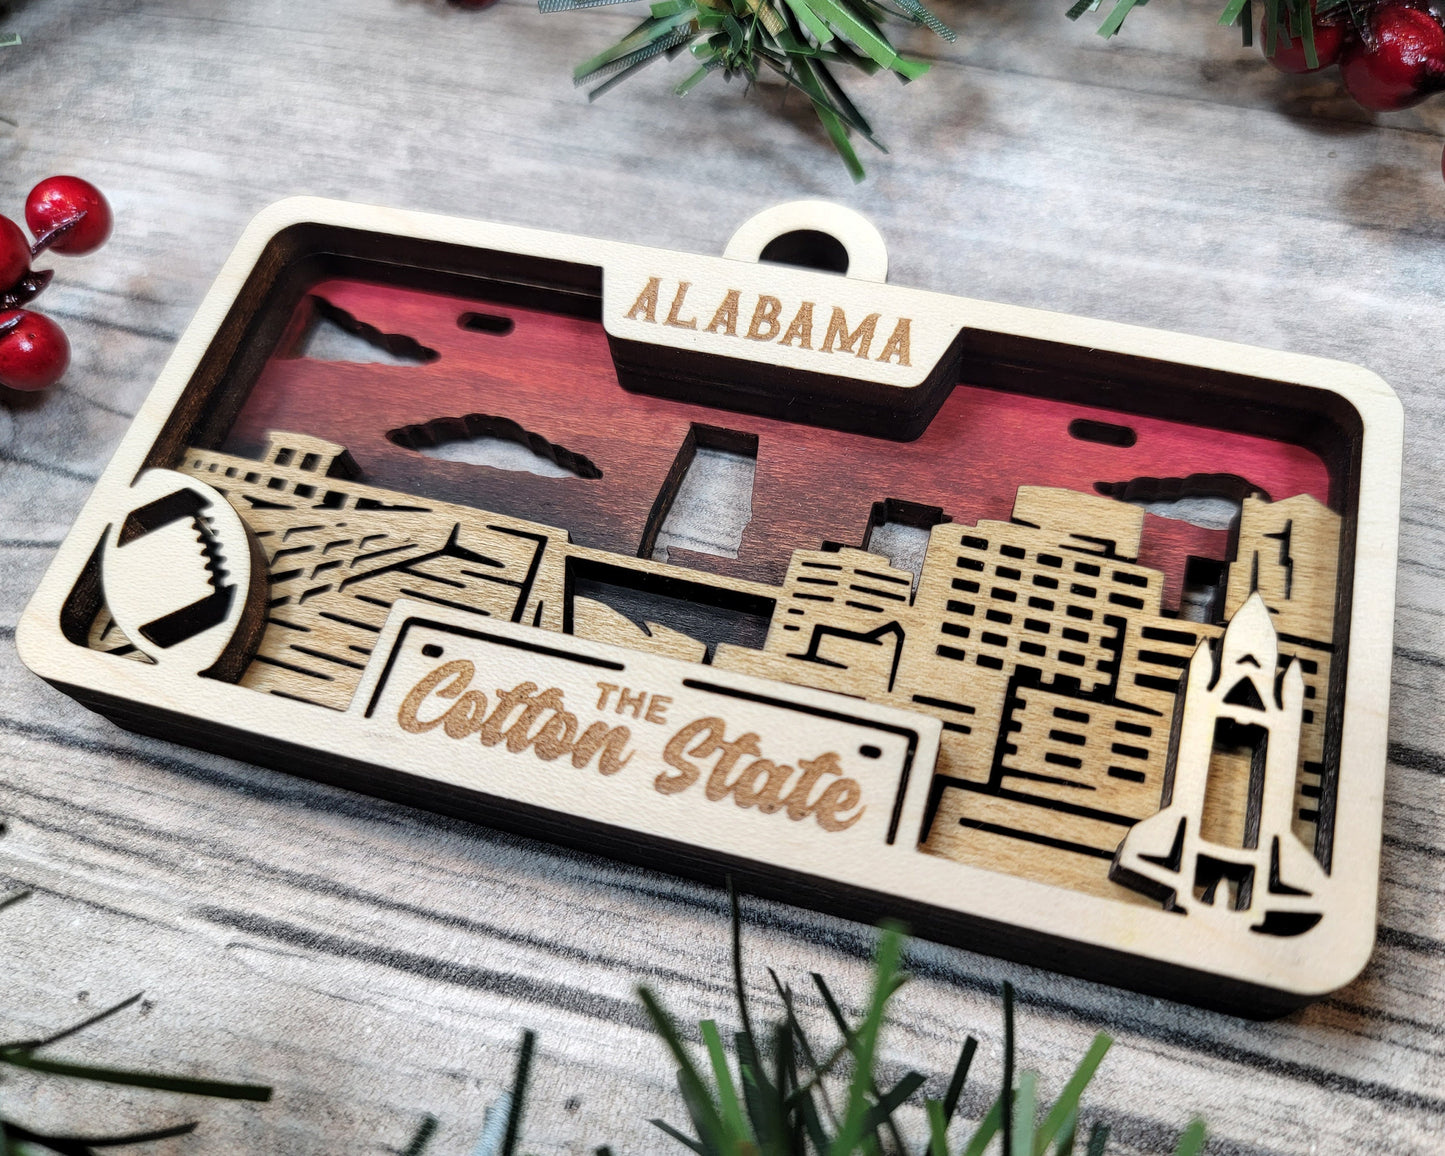 Alabama State Plate Ornament and Signage - SVG File Download - Sized for Glowforge - Laser Ready Digital Files